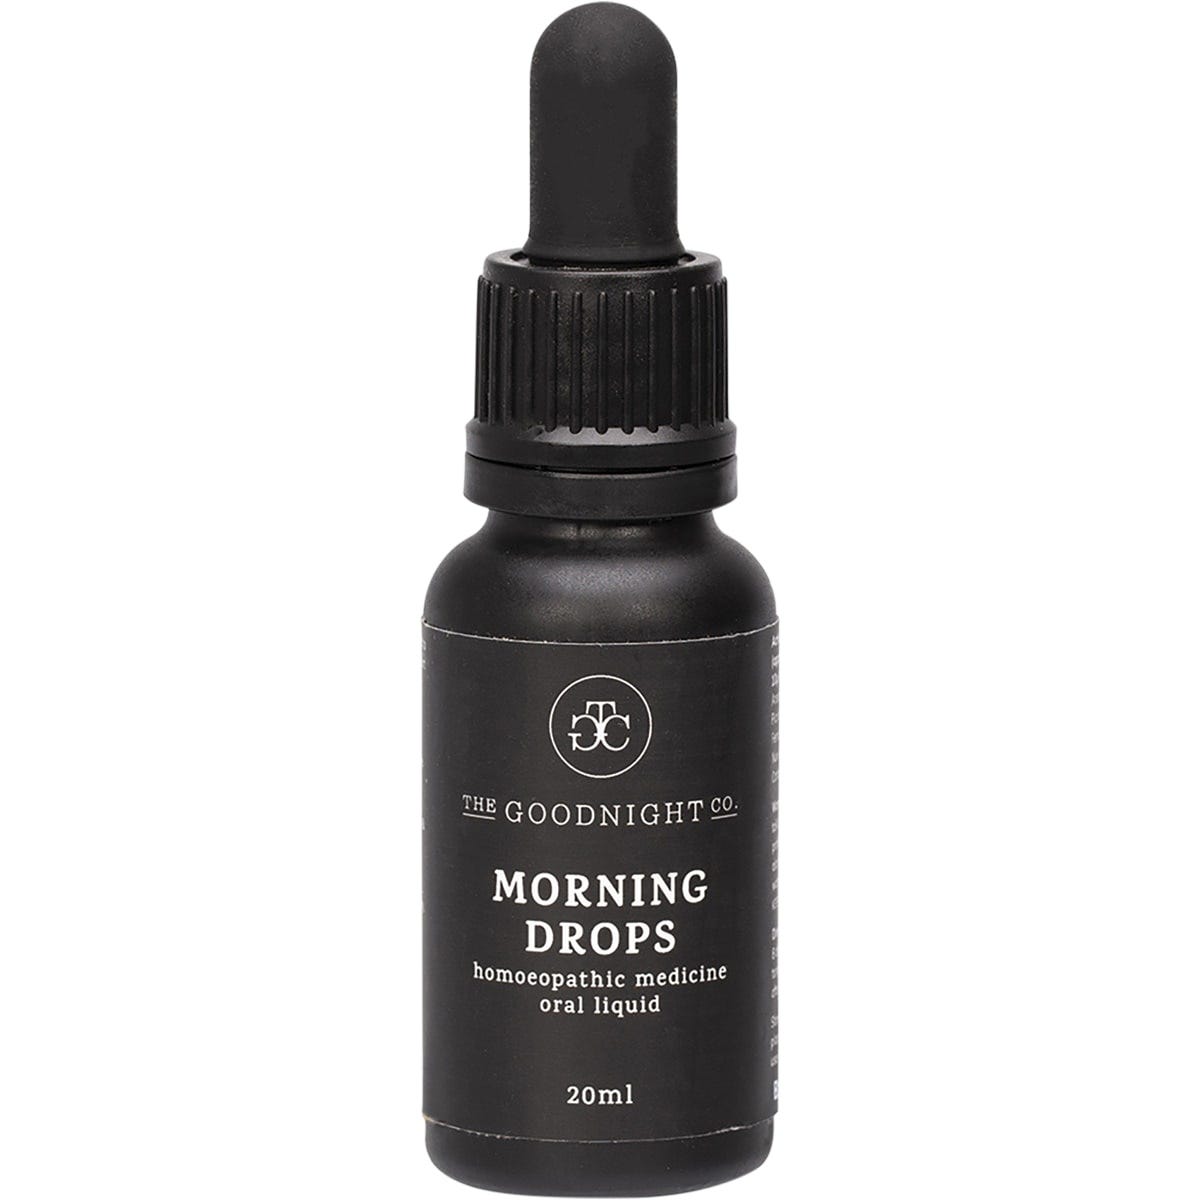 The Goodnight Co. Homoeopathic Medicine Oral Liquid Morning Drops